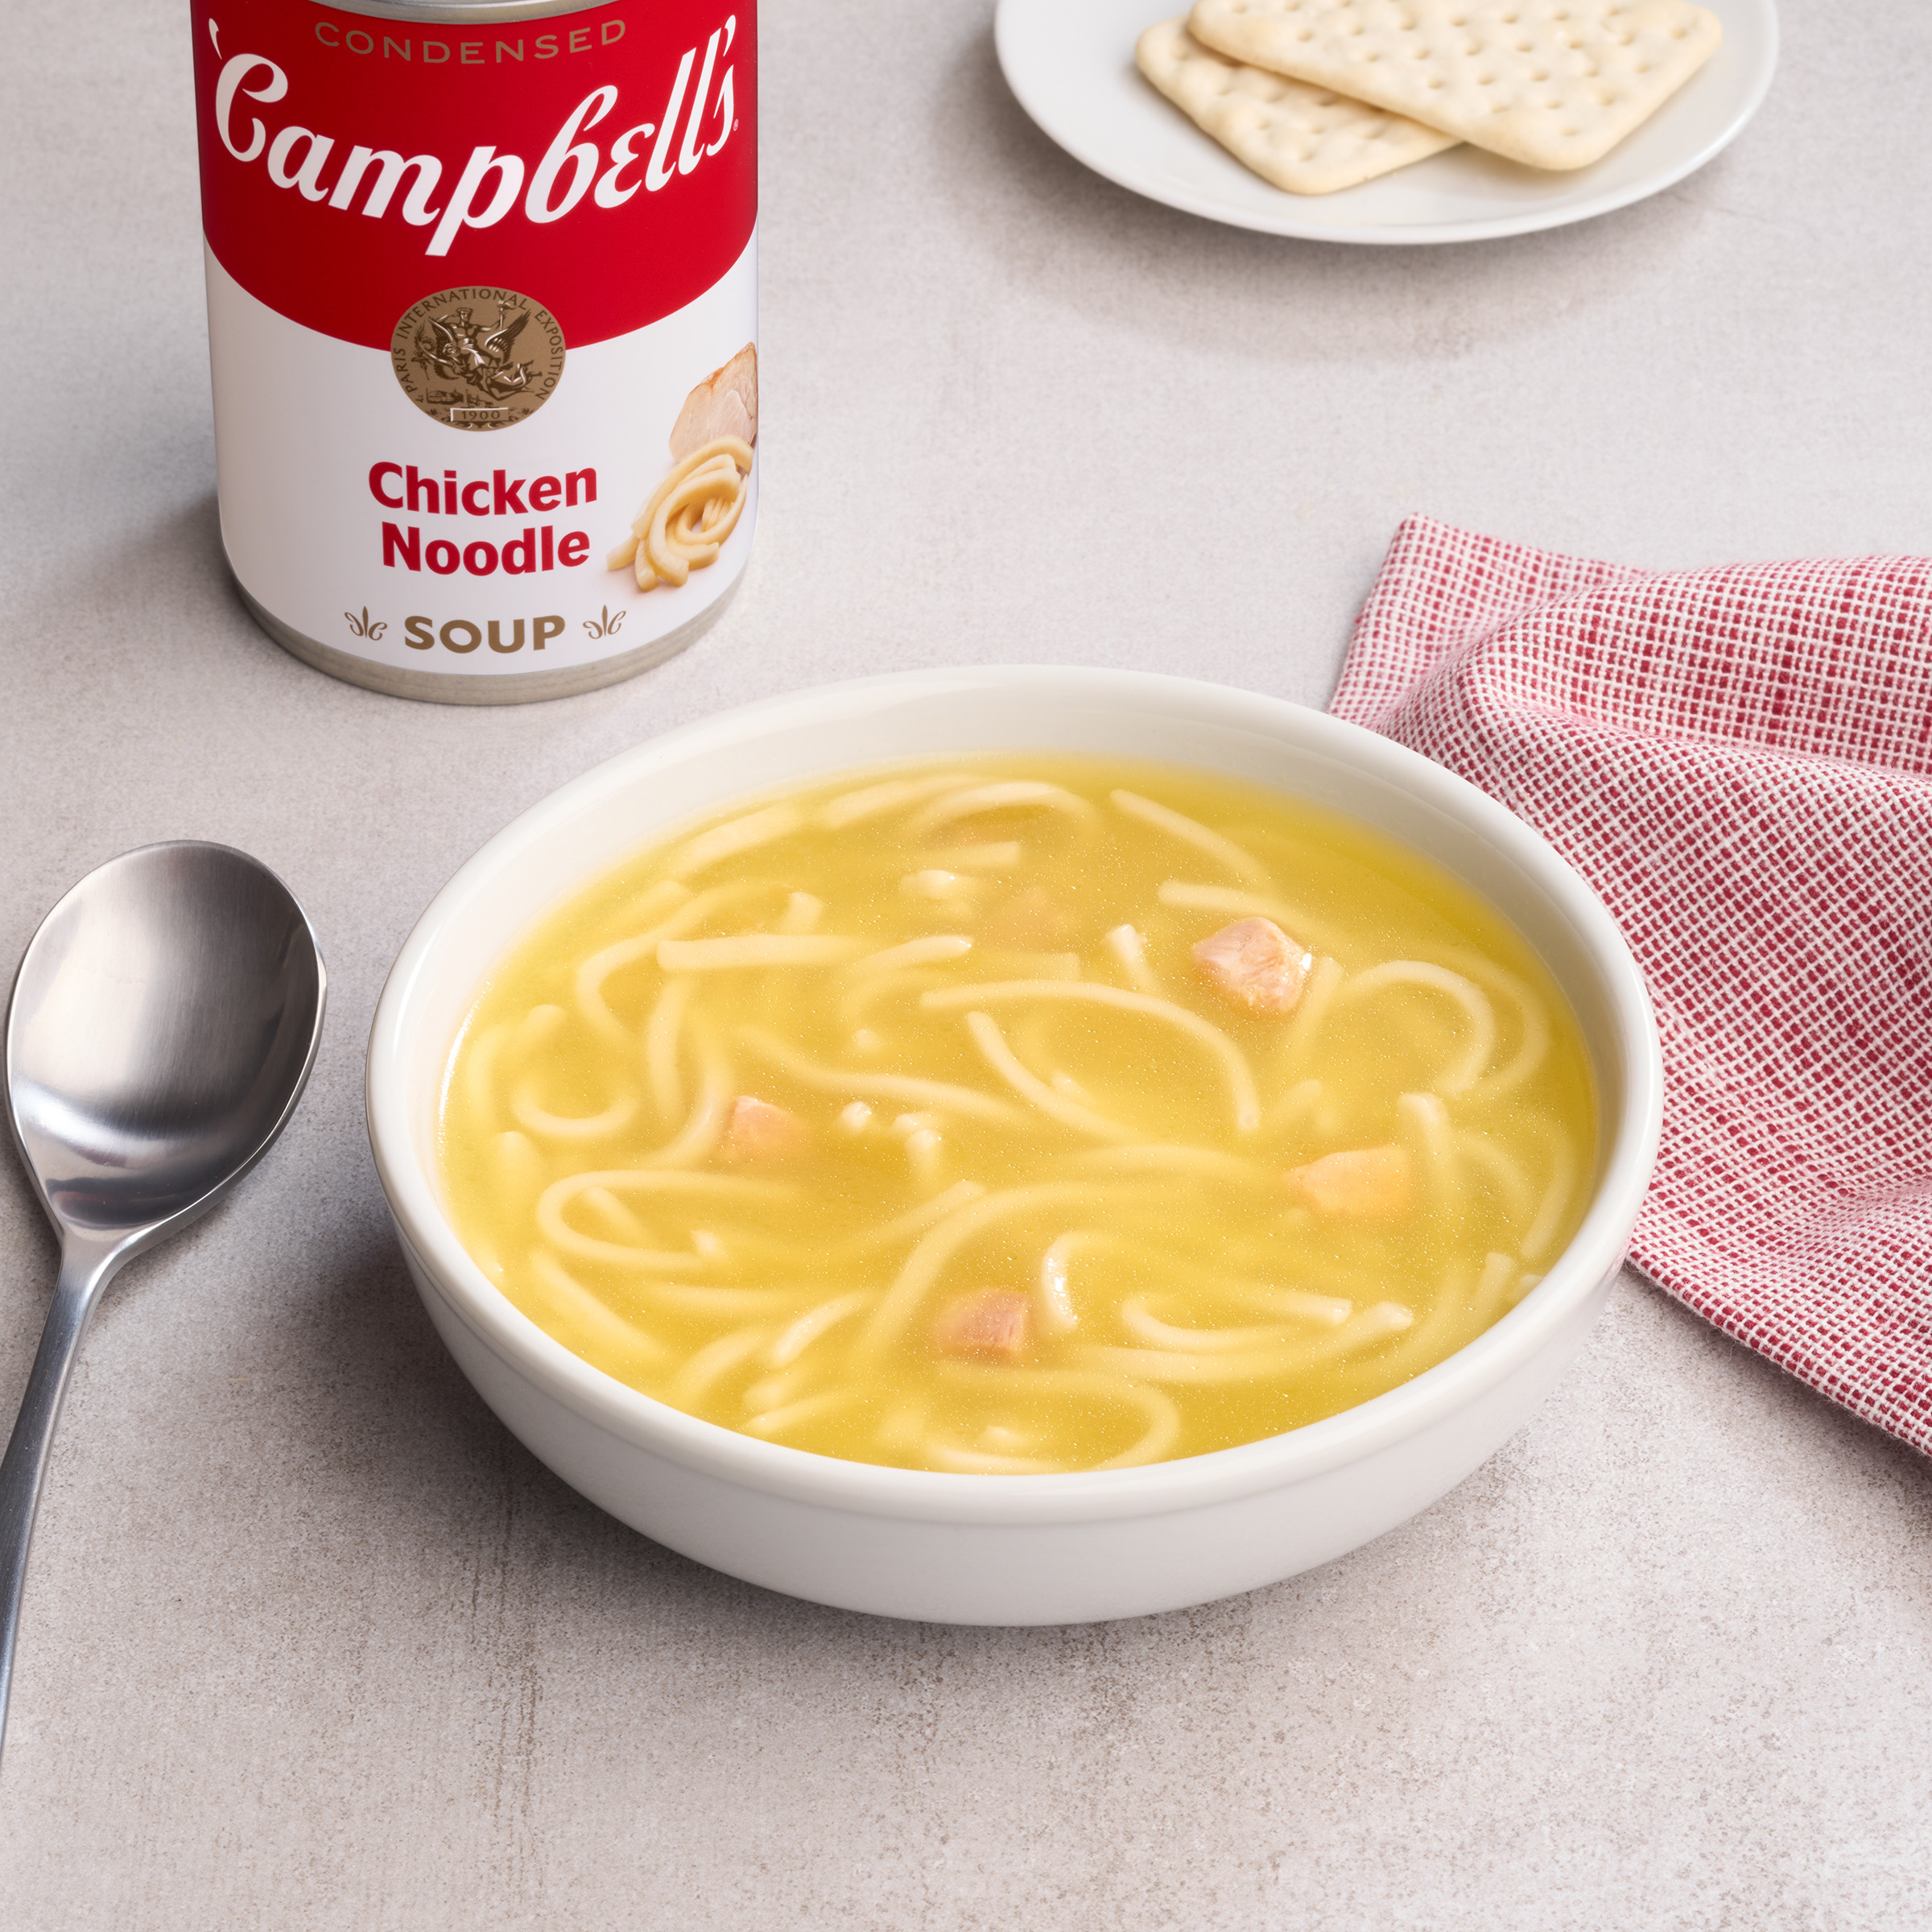 https://www.campbells.com/wp-content/uploads/2021/09/F21-Condensed-Eating_10oz_Chicken-Noodle-for-eComm-2400x2400-2.jpg